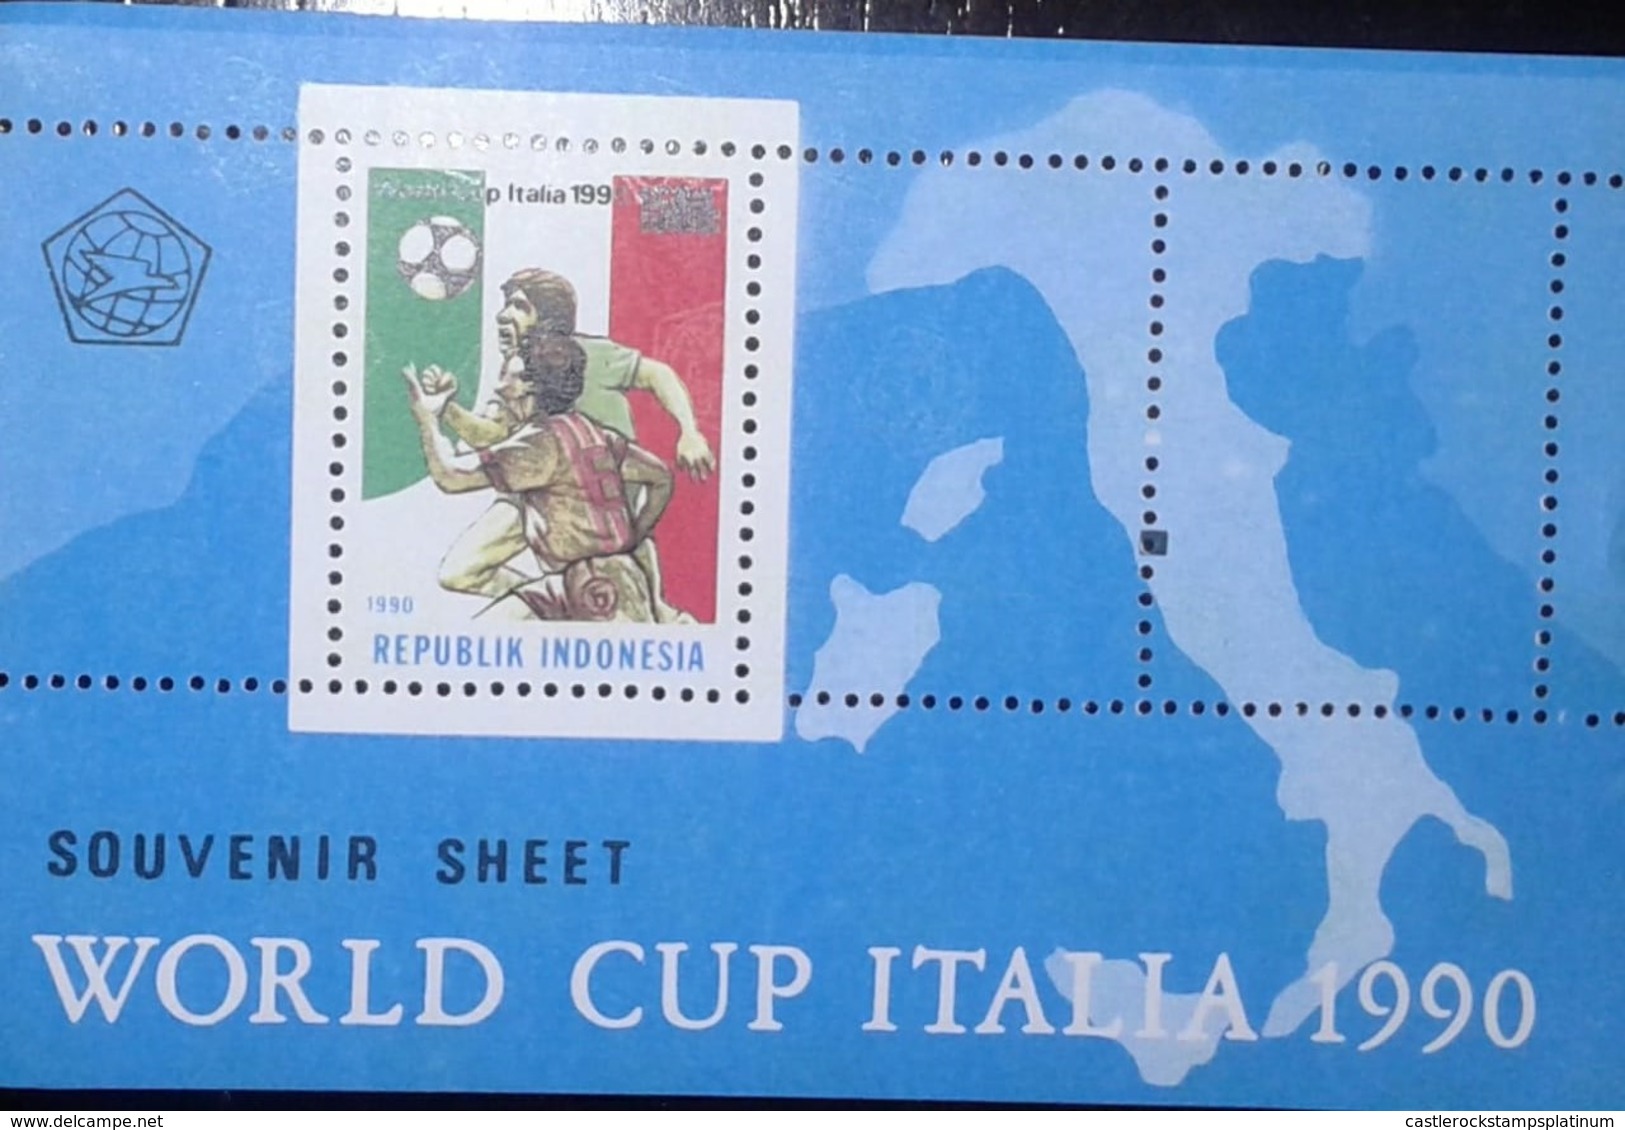 O) 1990 INDONESIA, WORLD CUP SOCCER CHAMPION SHIP ITALY 1990 - SCT 1435, MNH - Indonesia